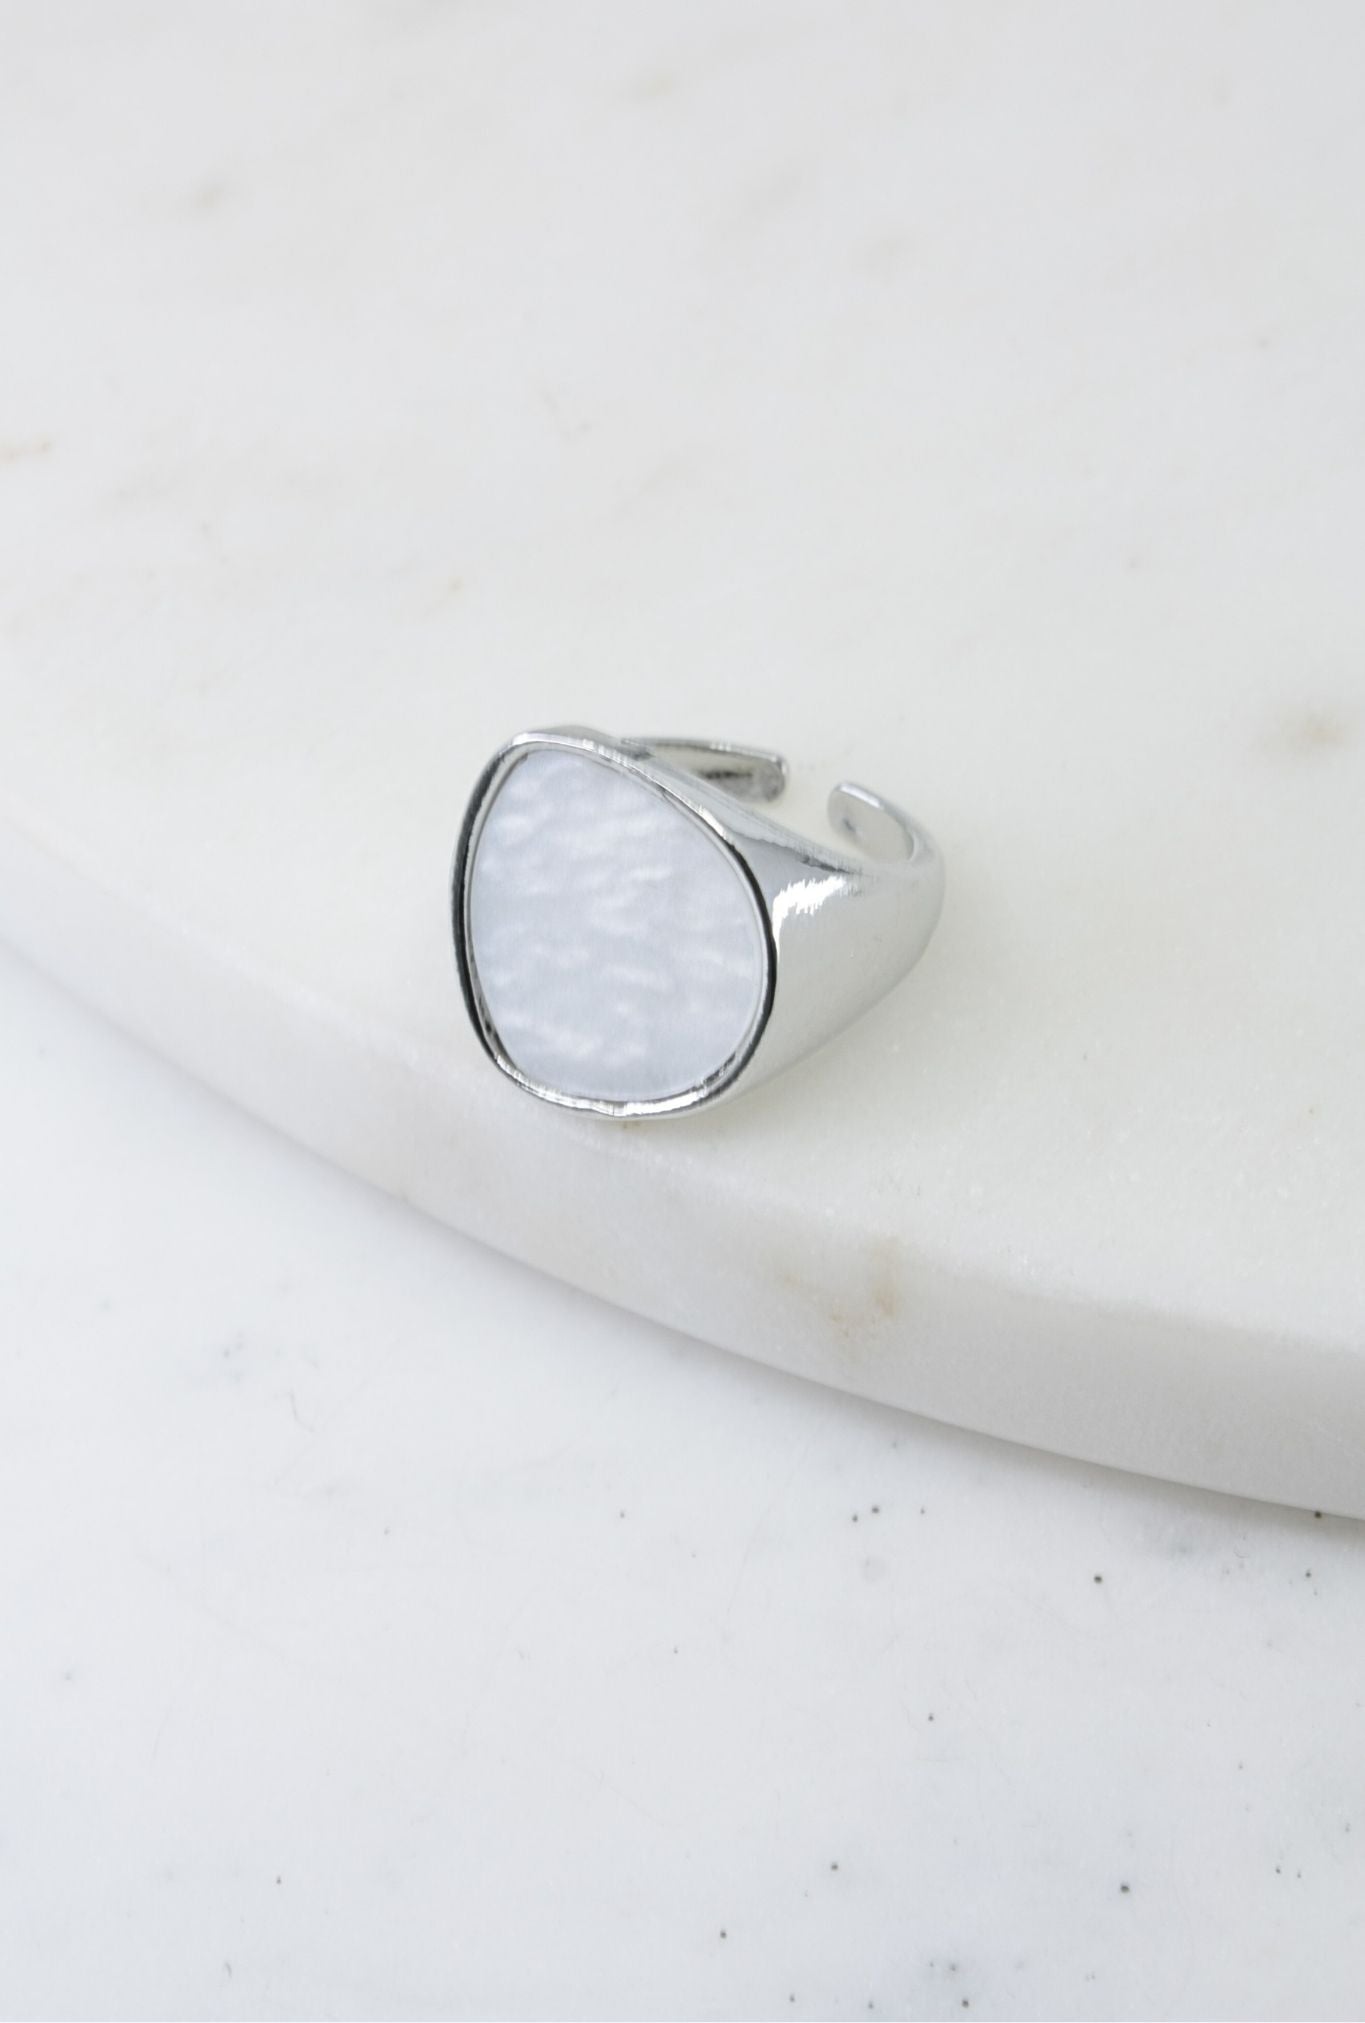 Silver Pearlized Stone Adjustable Ring